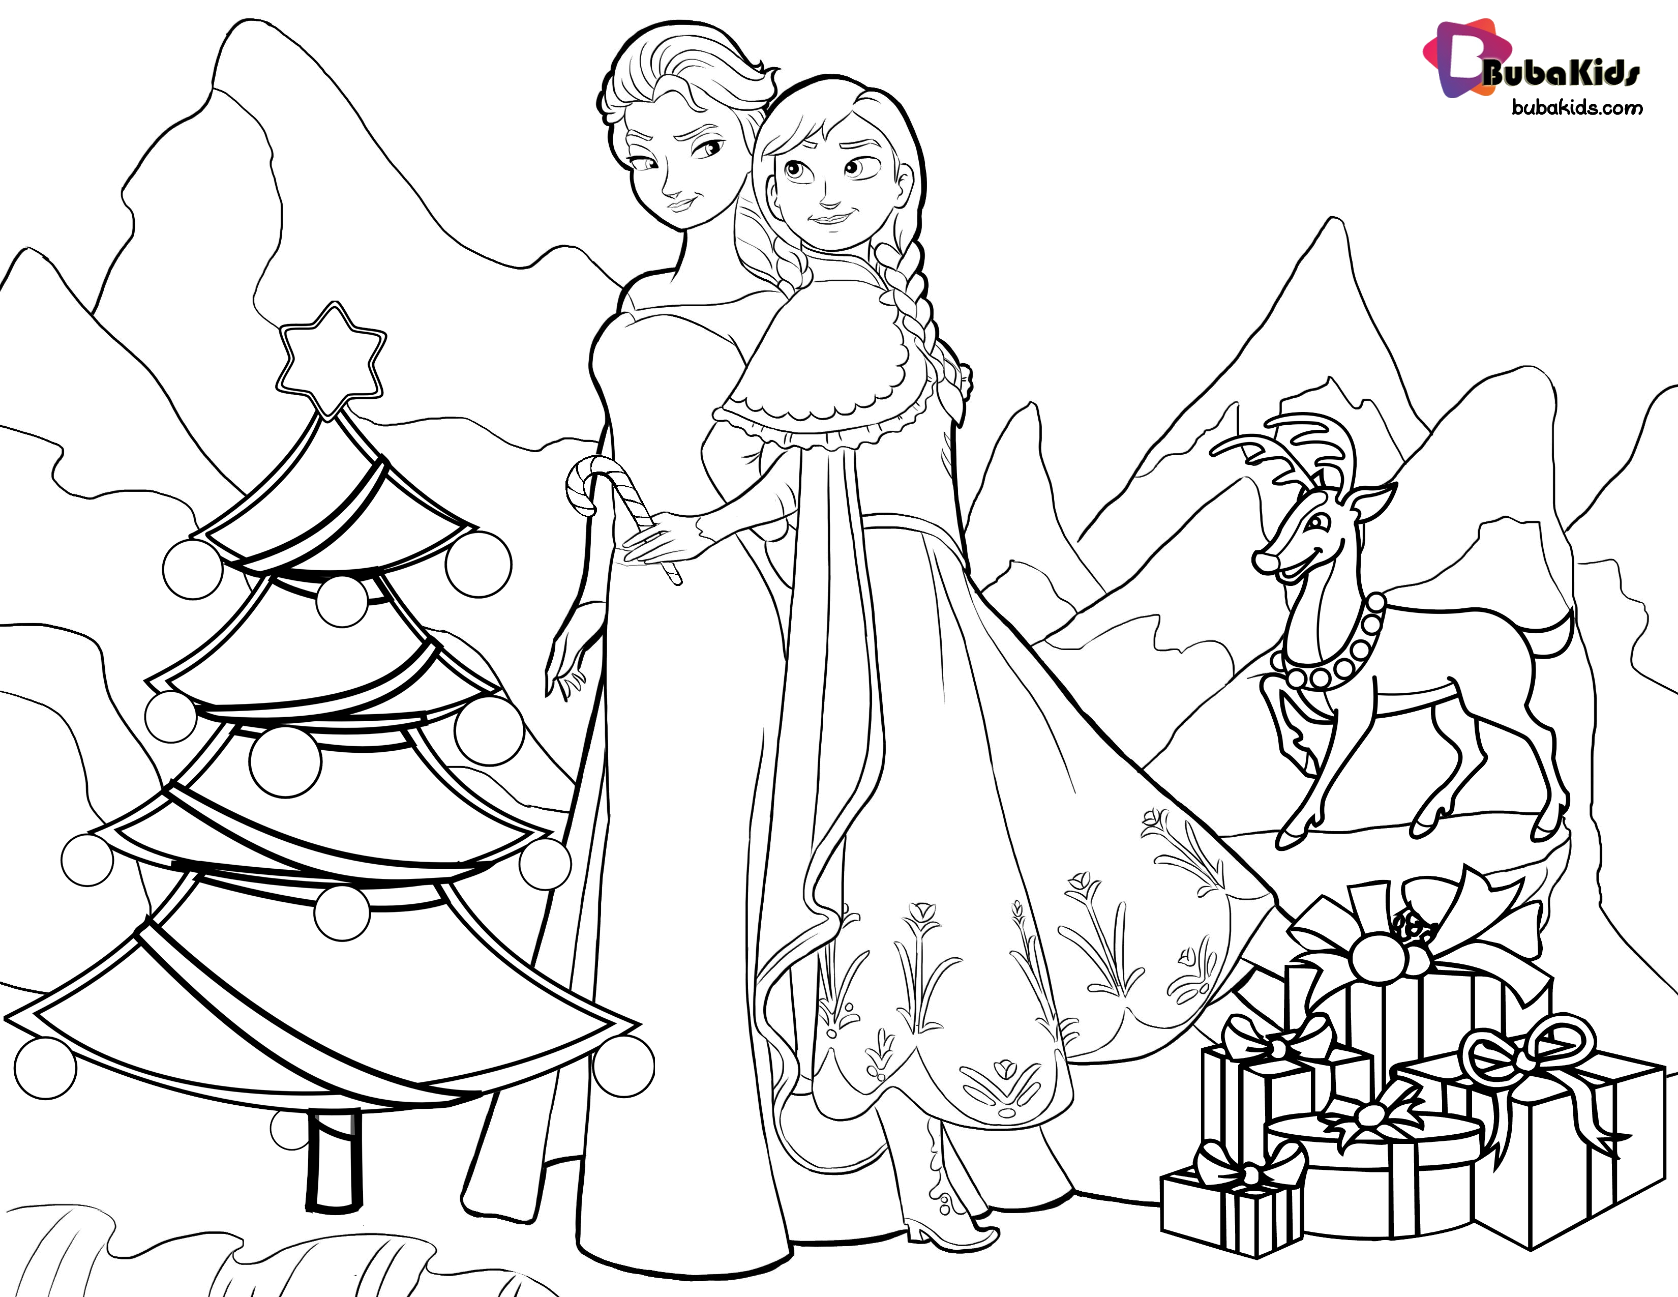 Frozen Queen Elsa and Princess Anna Christmas coloring page. - BubaKids.com